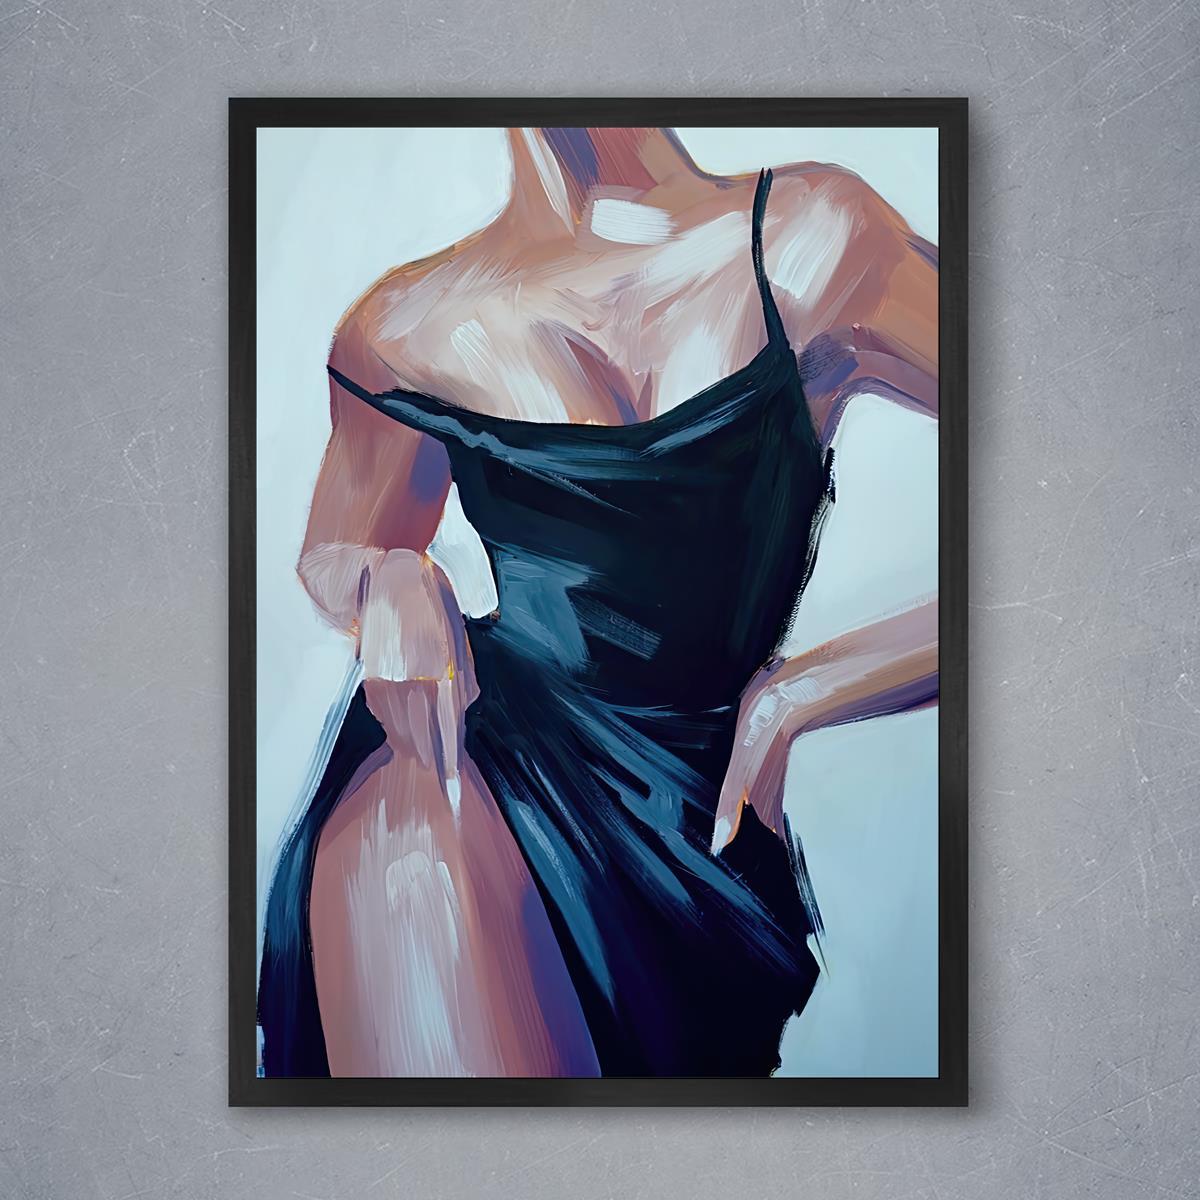 1pc unframed canvas poster modern sexy woman art diverse aesthetic female body poster the human body art oil painting art sexuality poster ideal gift for home bedroom living room bathroom bar coffee shop wall art wall decoration fall decor